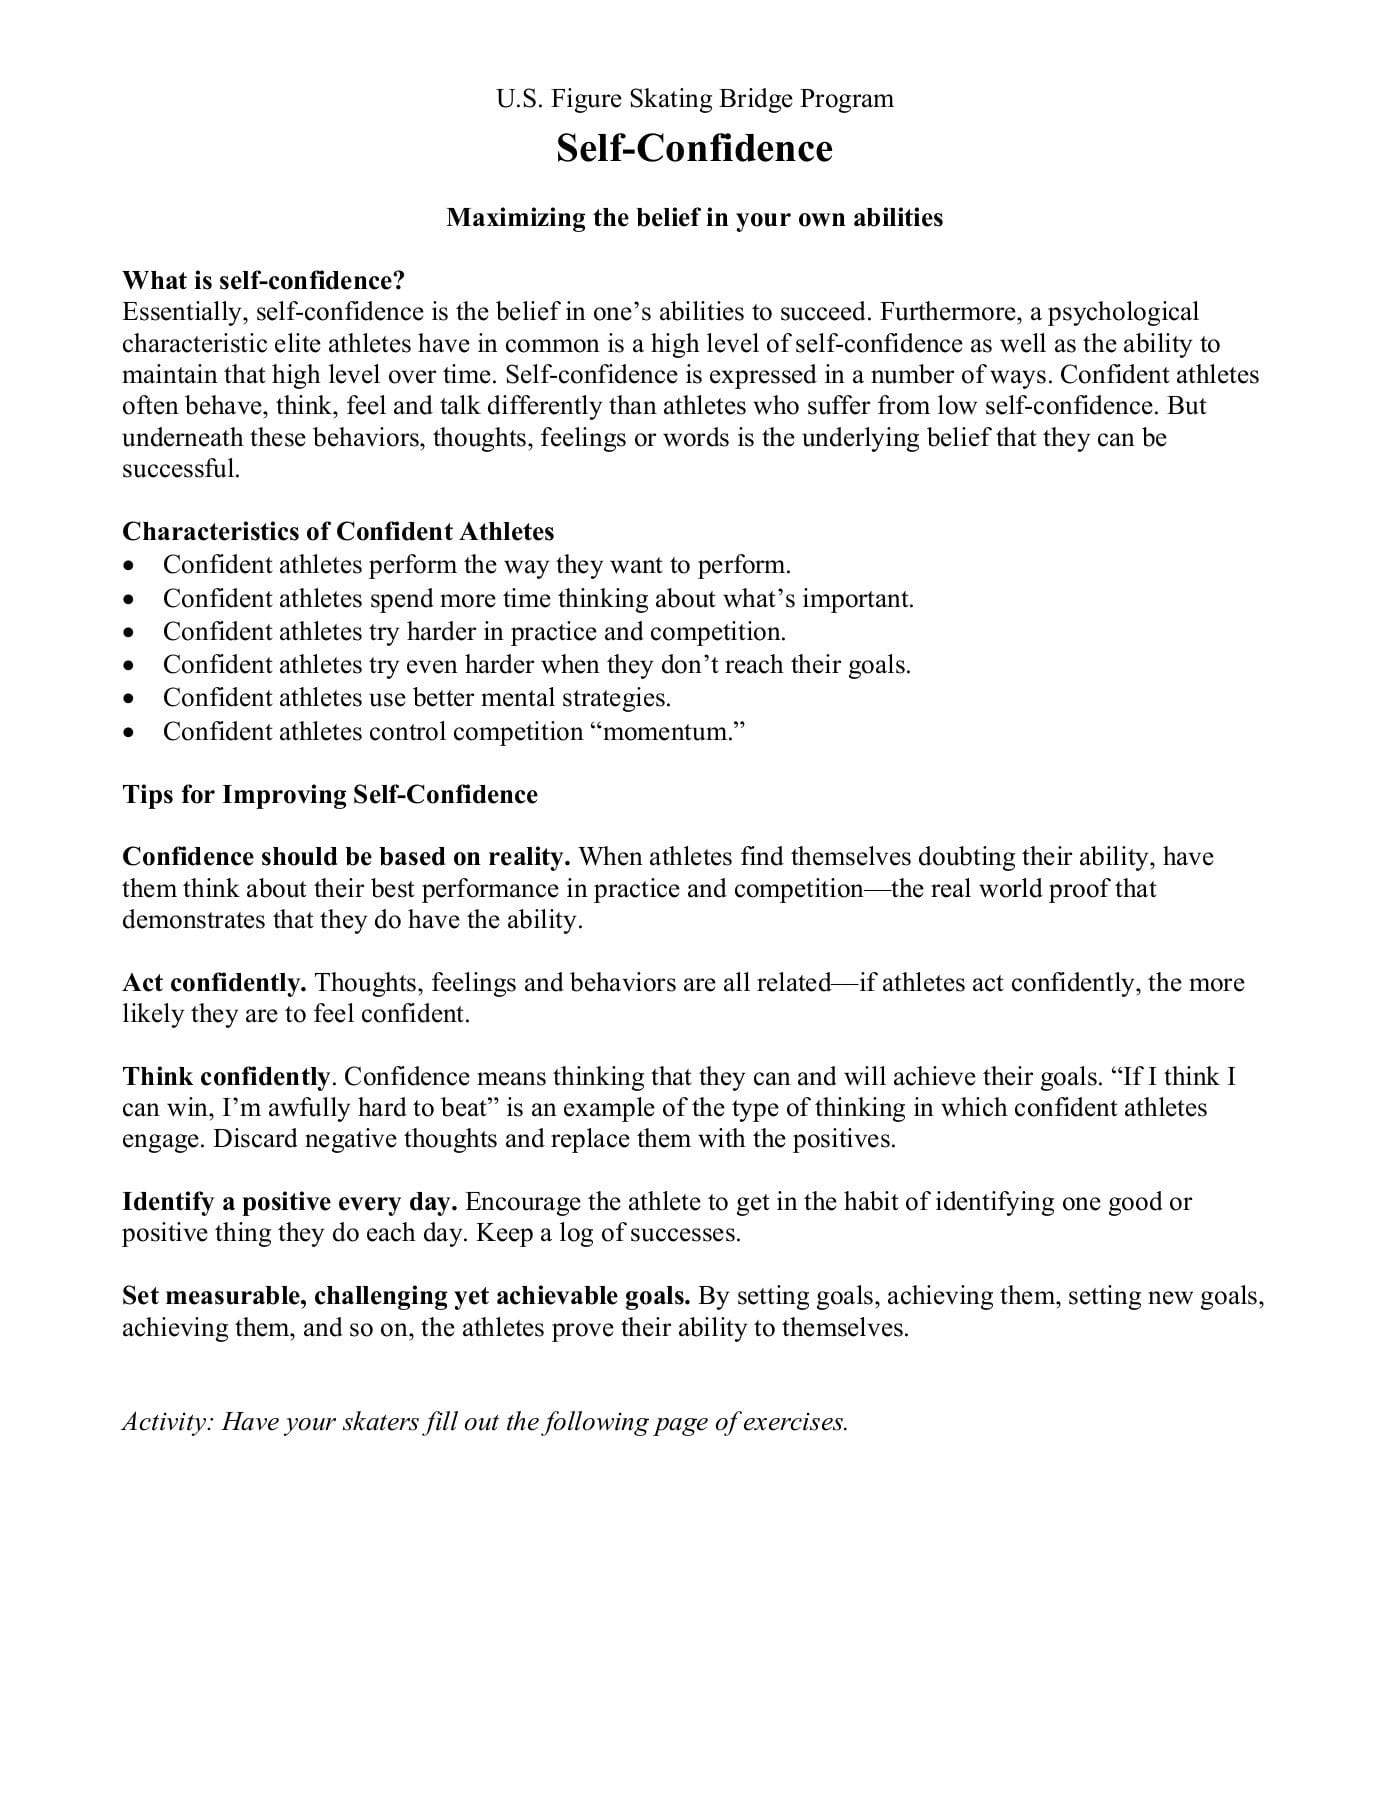 Goalsetting And Selfconfidence Worksheetspdf Pages 1  4  Text Throughout Challenging Negative Thoughts Worksheet